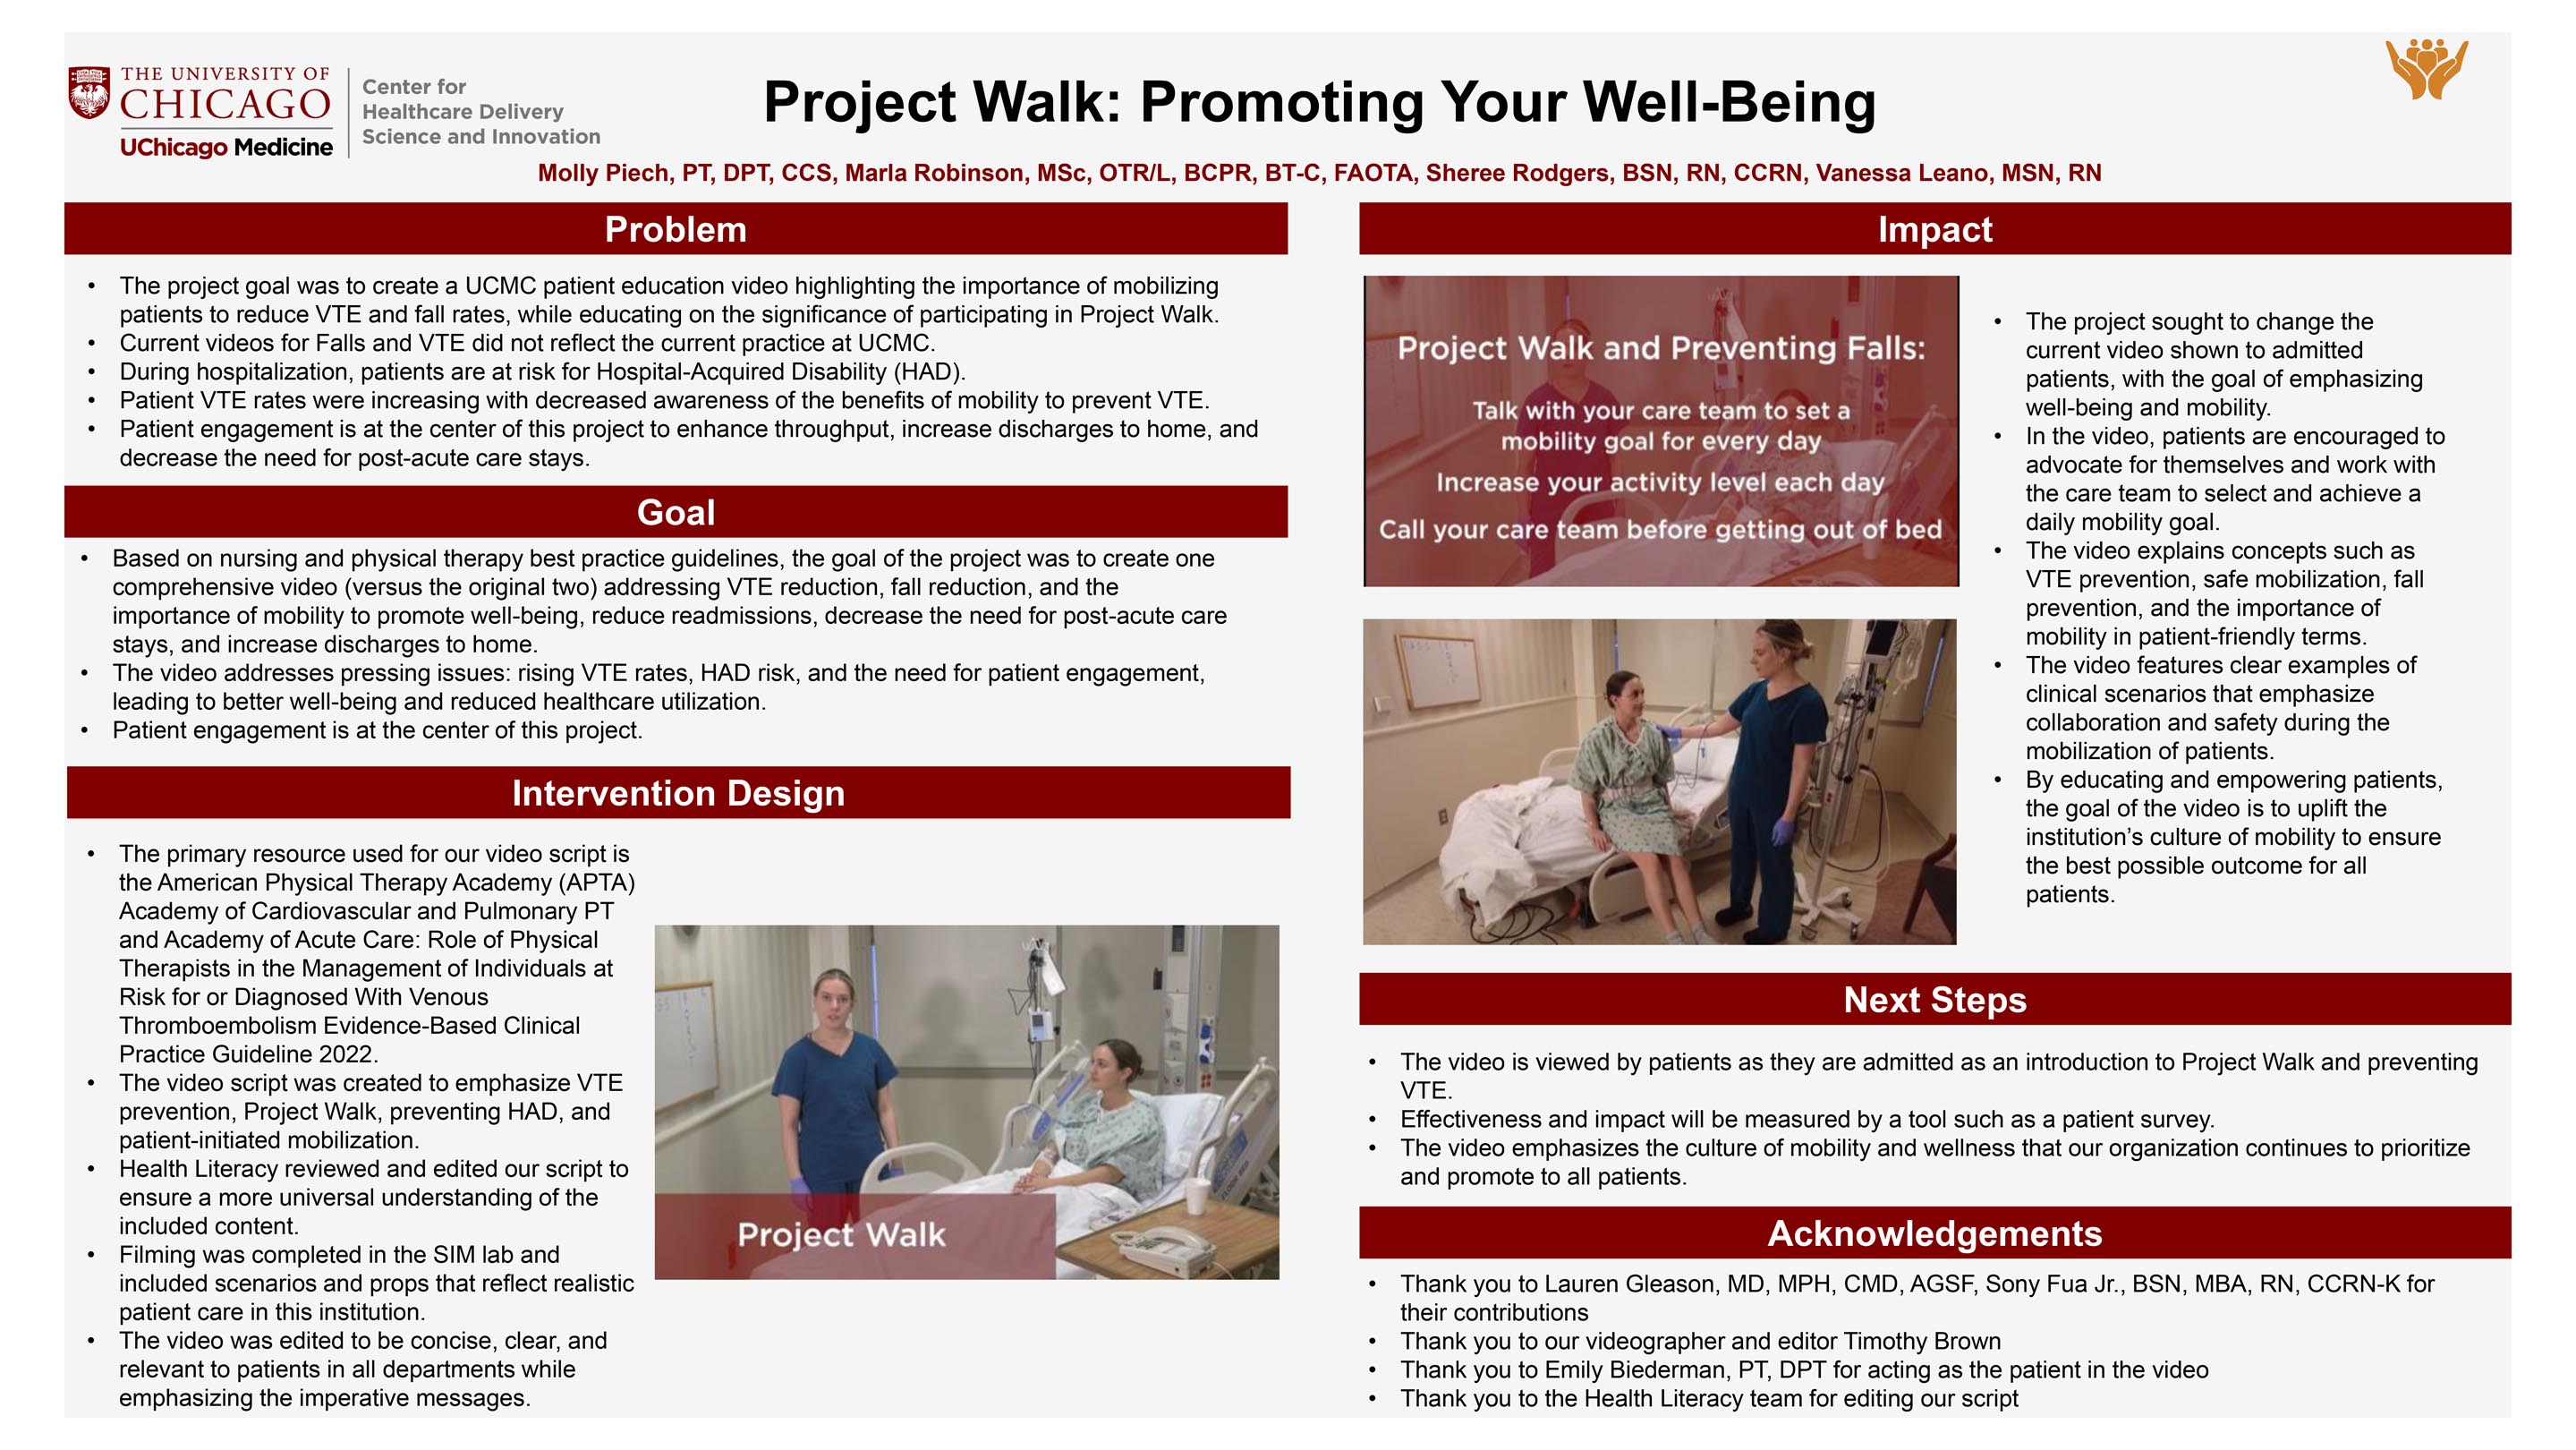 PIECH_Project Walk Promoting Your Well-Being